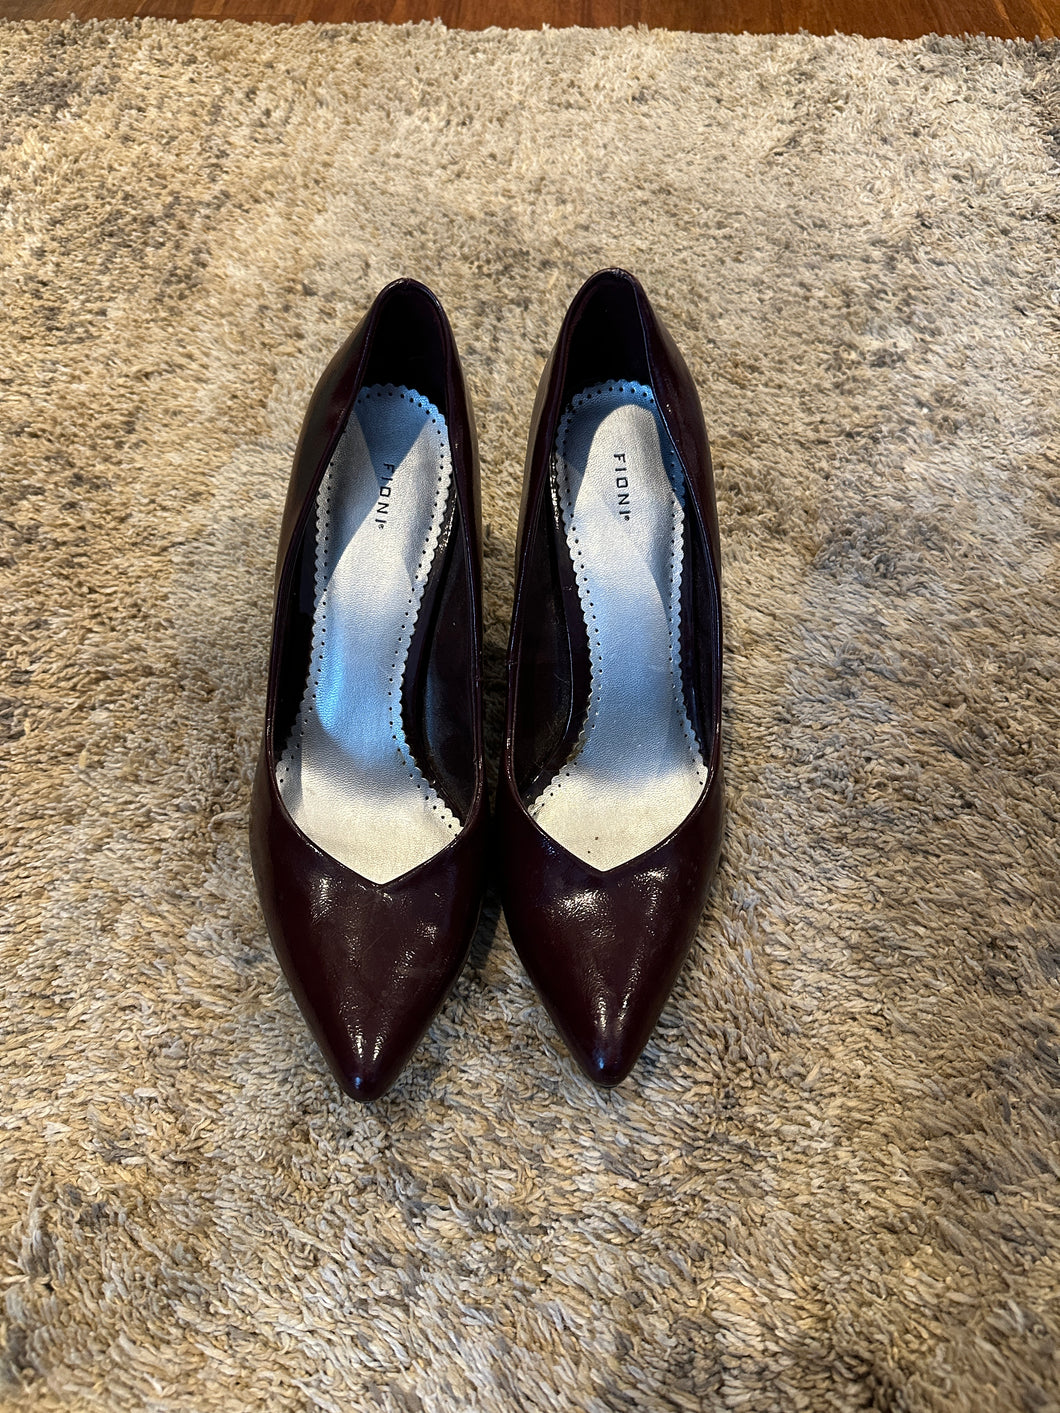 Fioni - Womens pointed High Heels Maroon - Worn once! 9